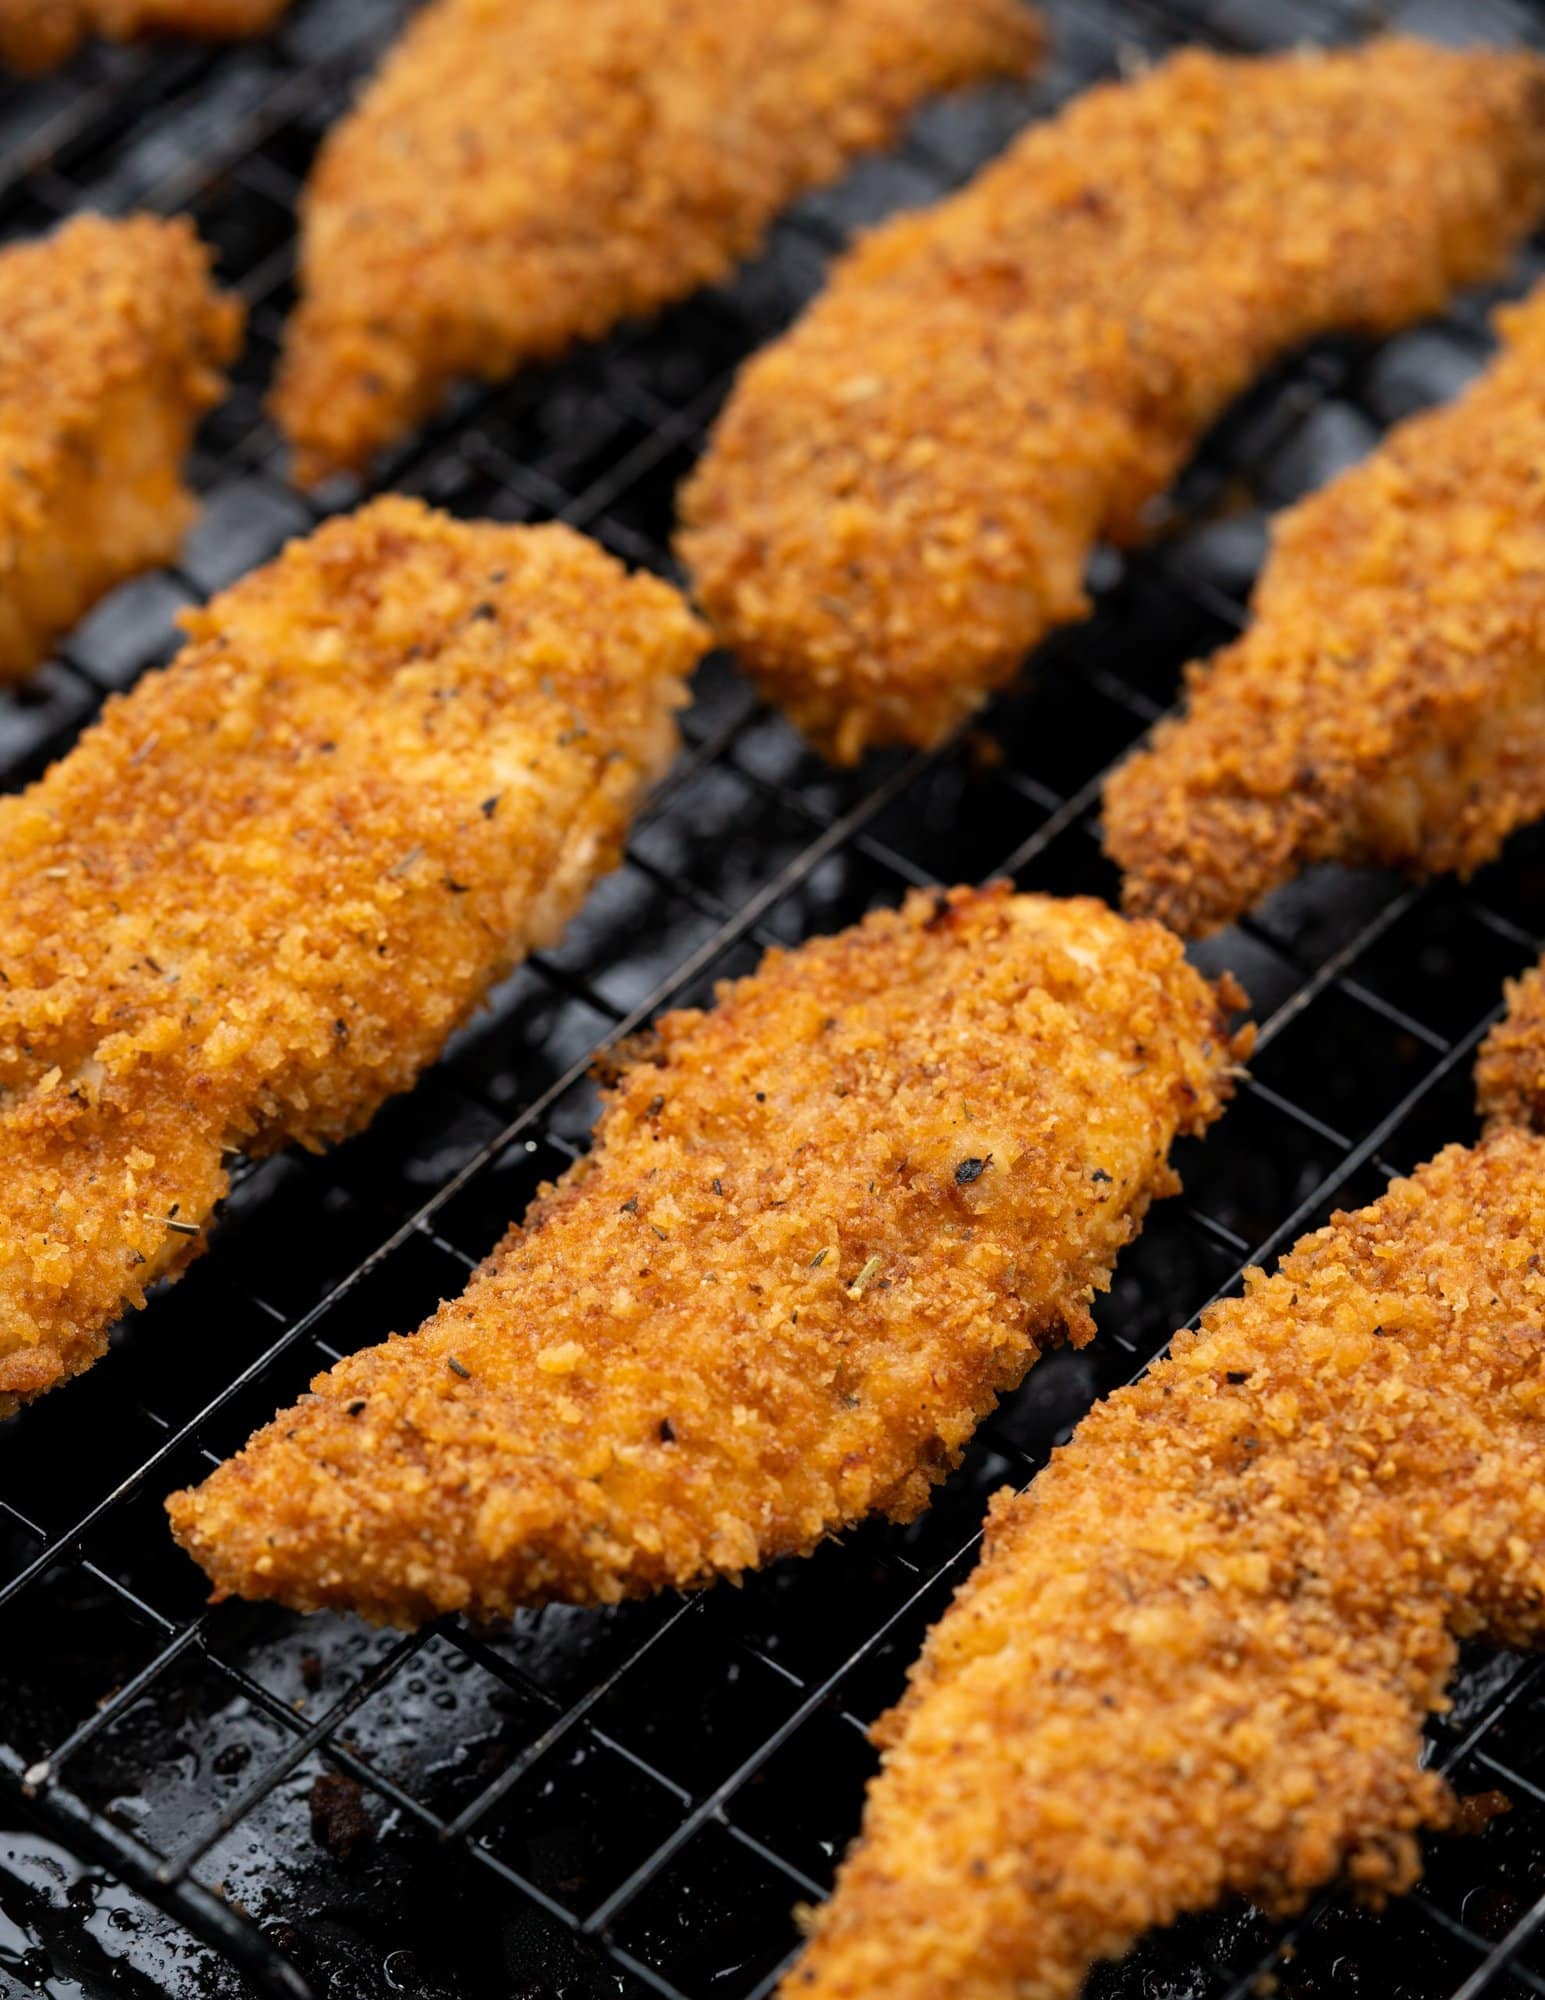 Crispy baked chicken tenders right out of the oven.